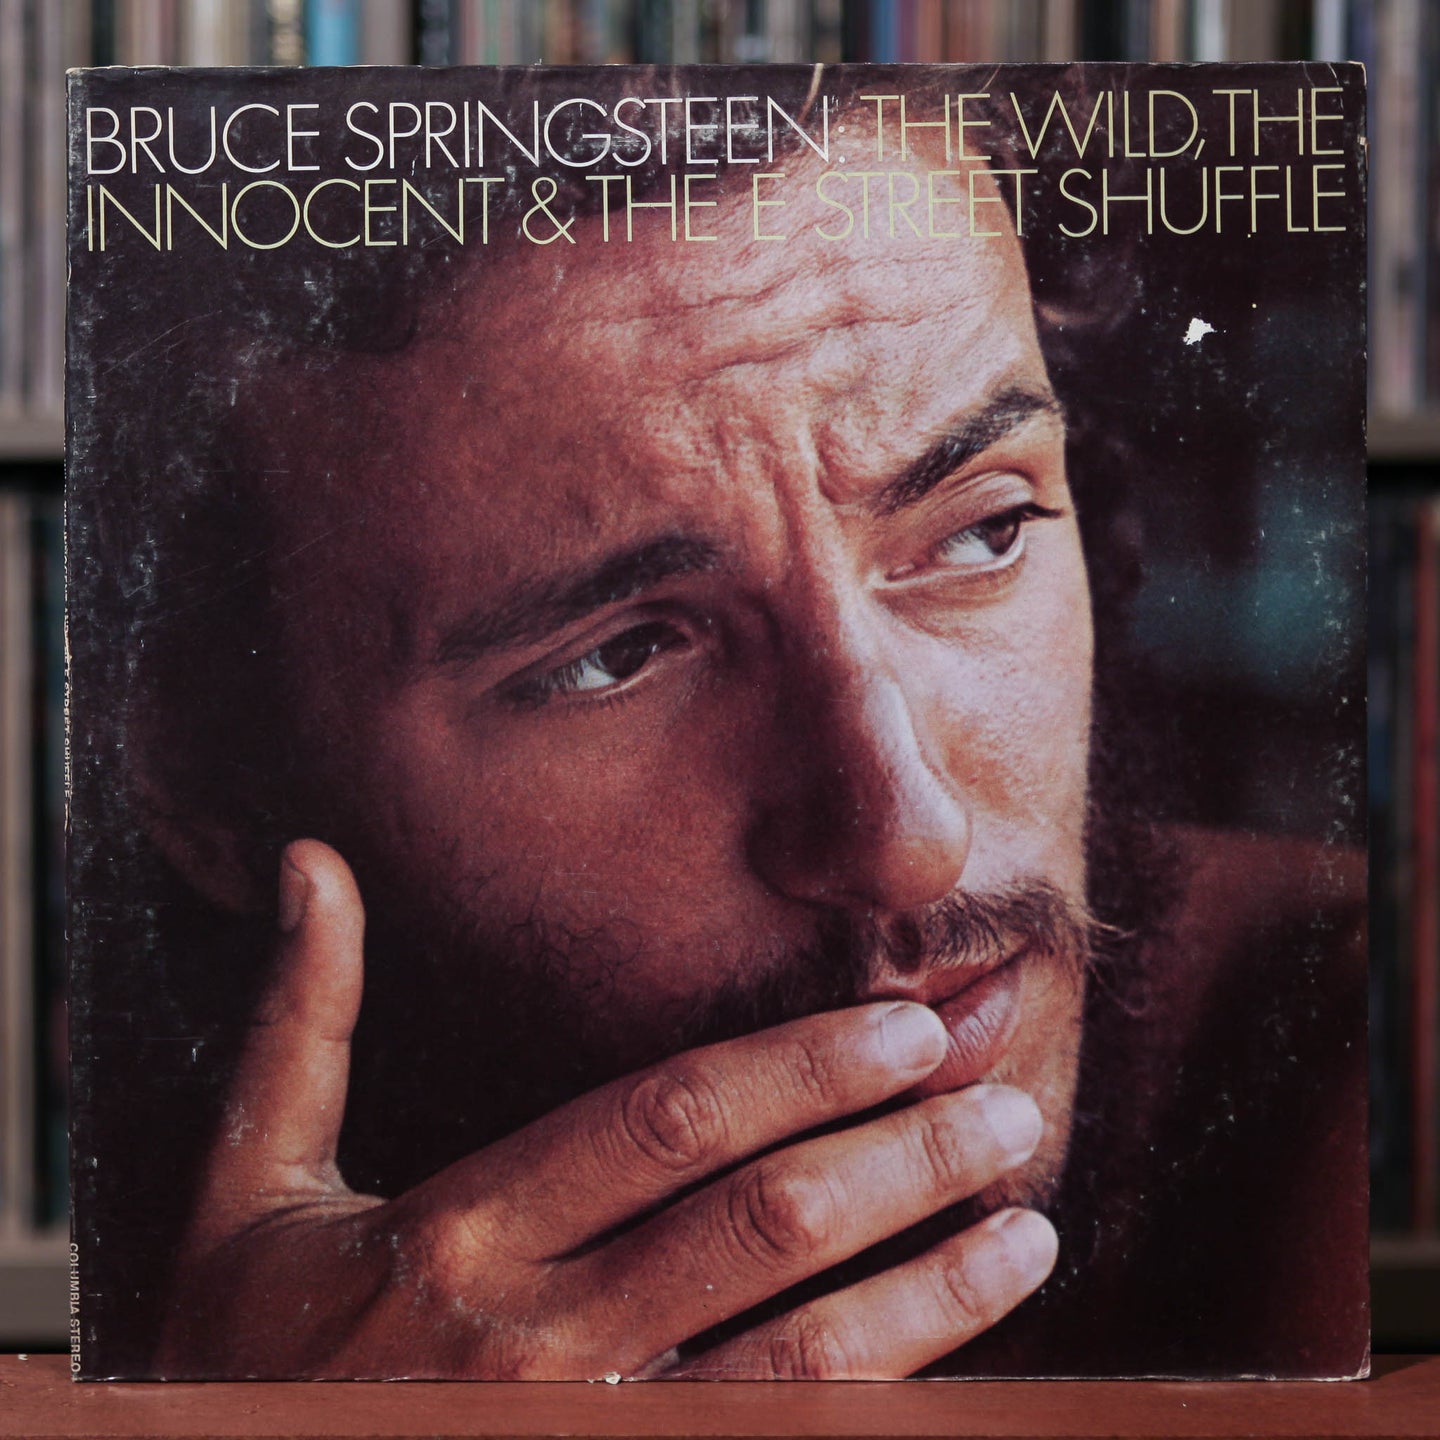 Bruce Springsteen - The Wild, The Innocent & The E Street Shuffle - 1975  Columbia, EX/VG+